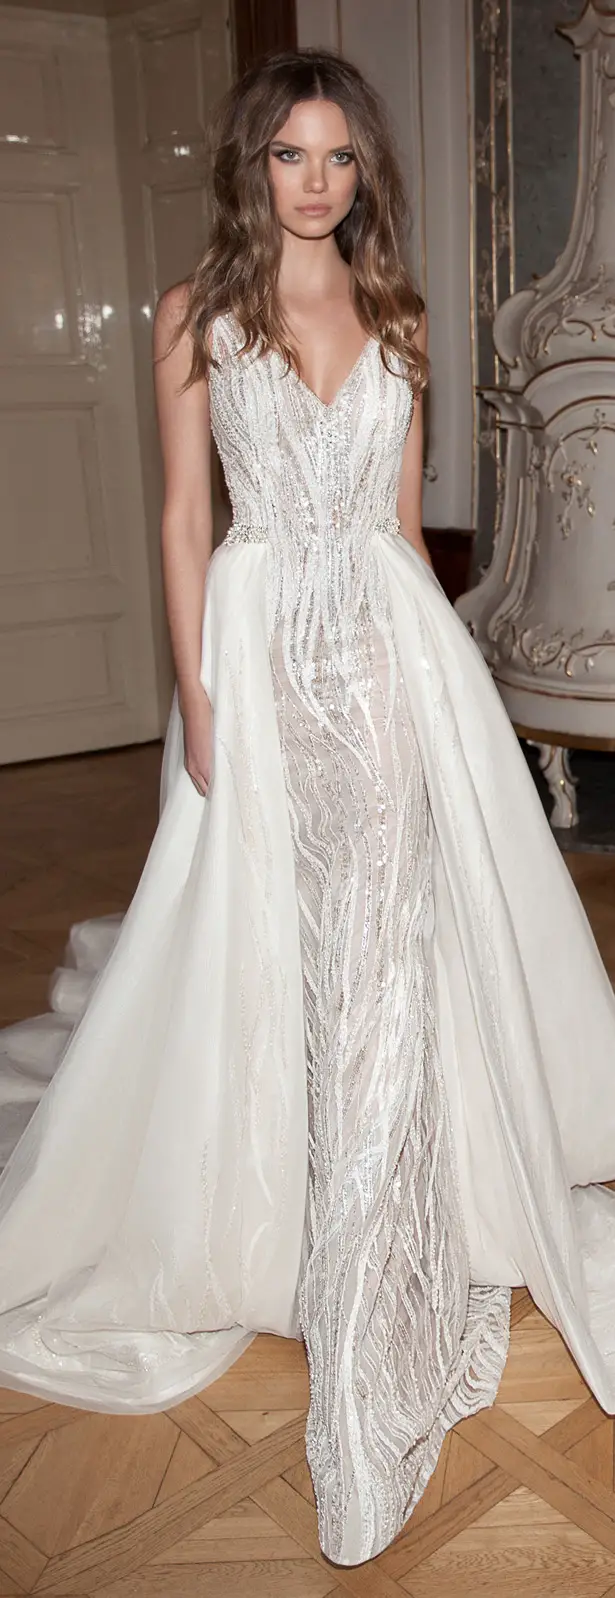 Bridal Trends: Wedding Dresses with Detachable Skirts ...